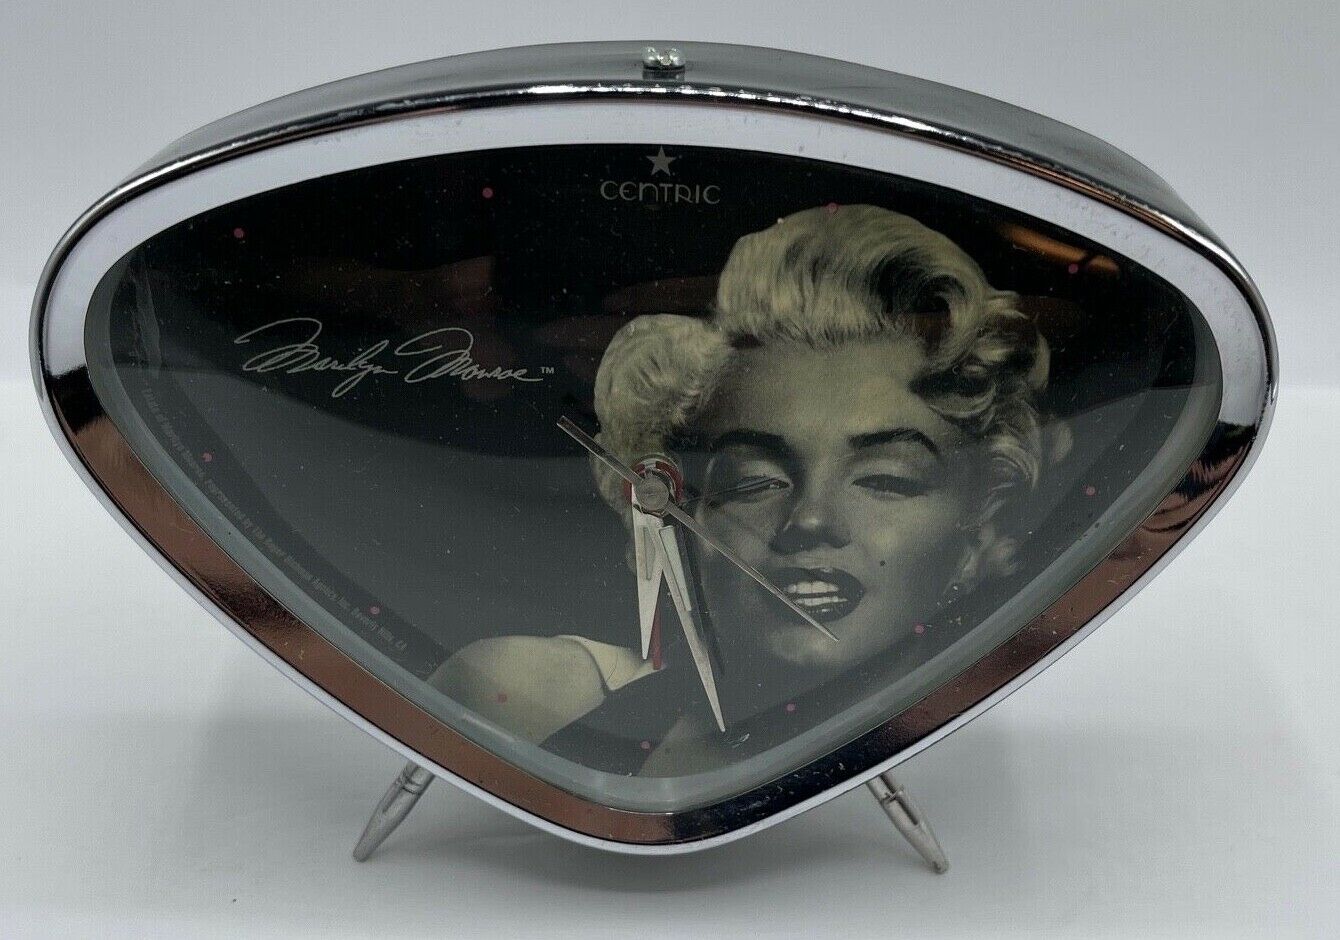 Centric Marilyn Monroe Triangle Shape Desk Shelf Clock For Parts Or Repair